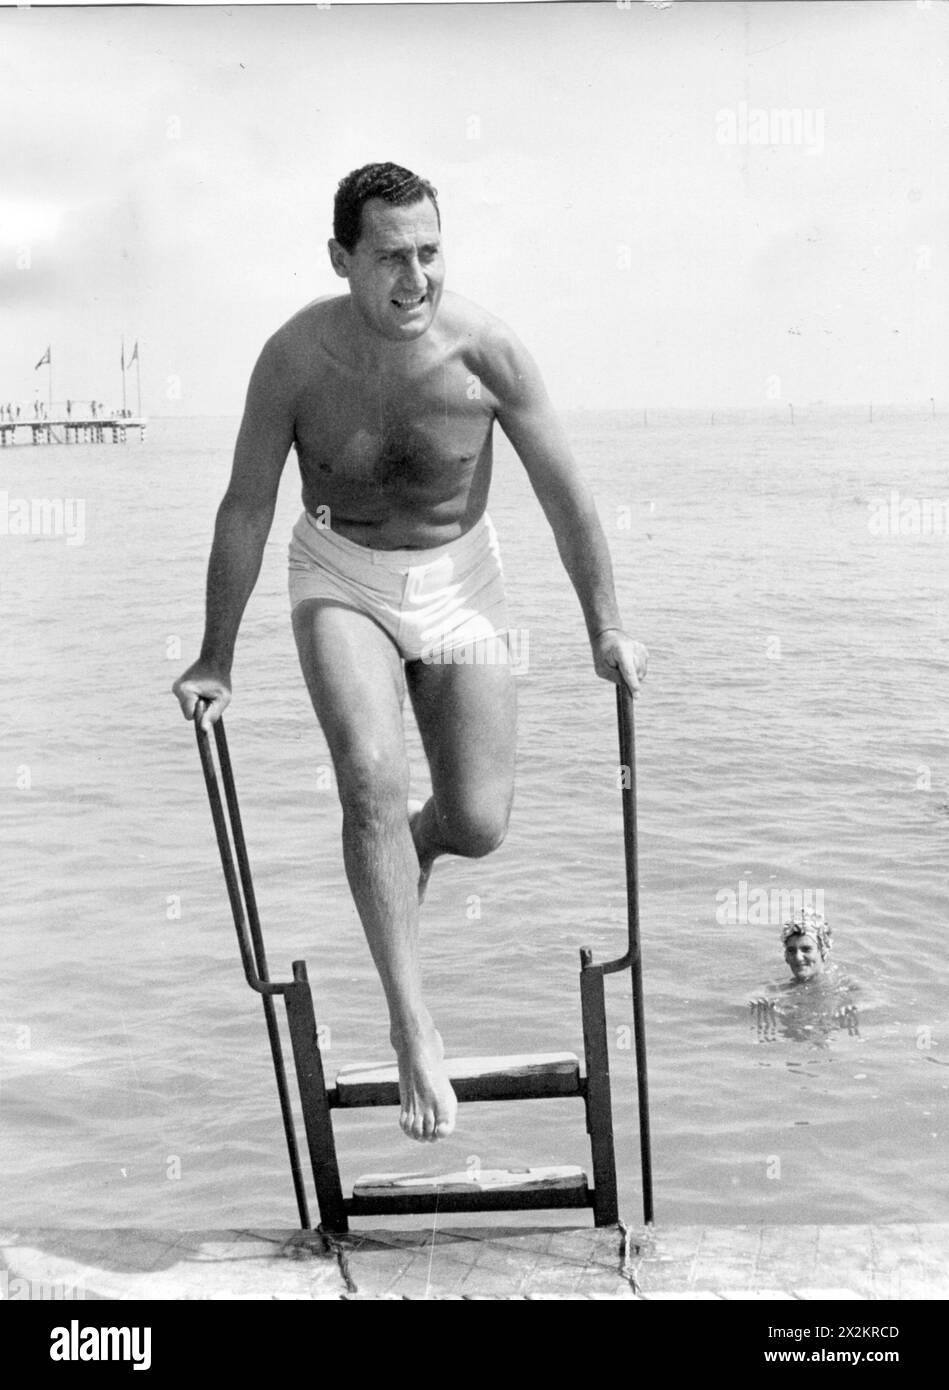 Sordi, Alberto, 15.6.1920 - 24.2.2003, Italian actor, rising from the sea, ADDITIONAL-RIGHTS-CLEARANCE-INFO-NOT-AVAILABLE Stock Photo